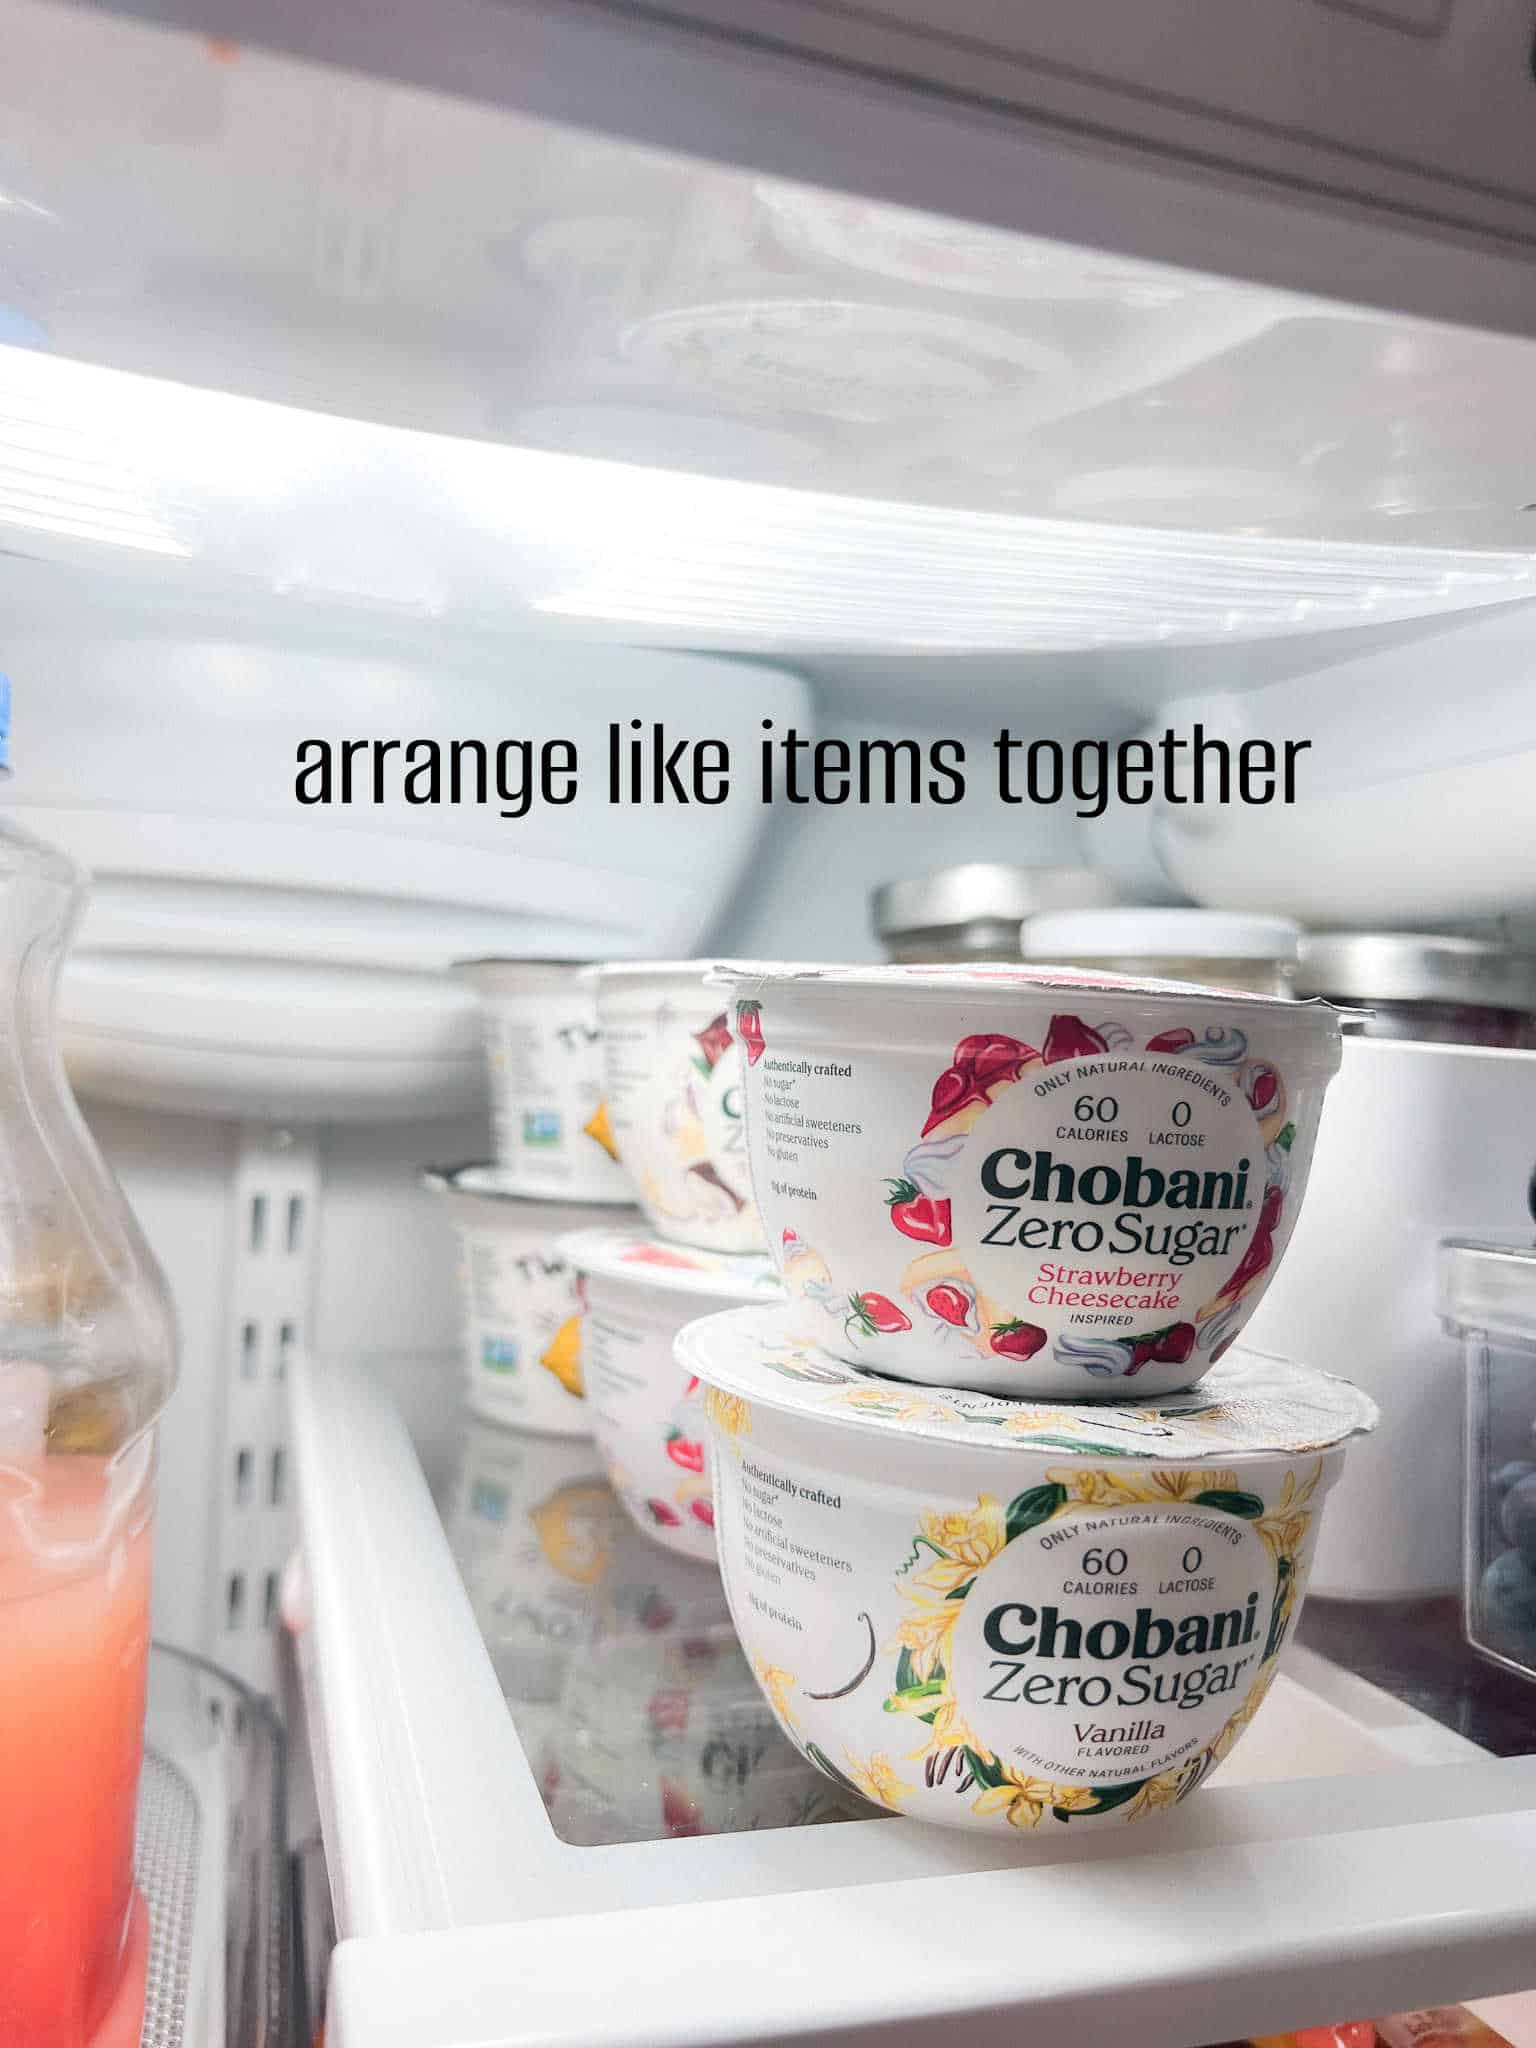 How to organize your fridge. Make the most of your fridge space and stop wasting food with these easy ideas.